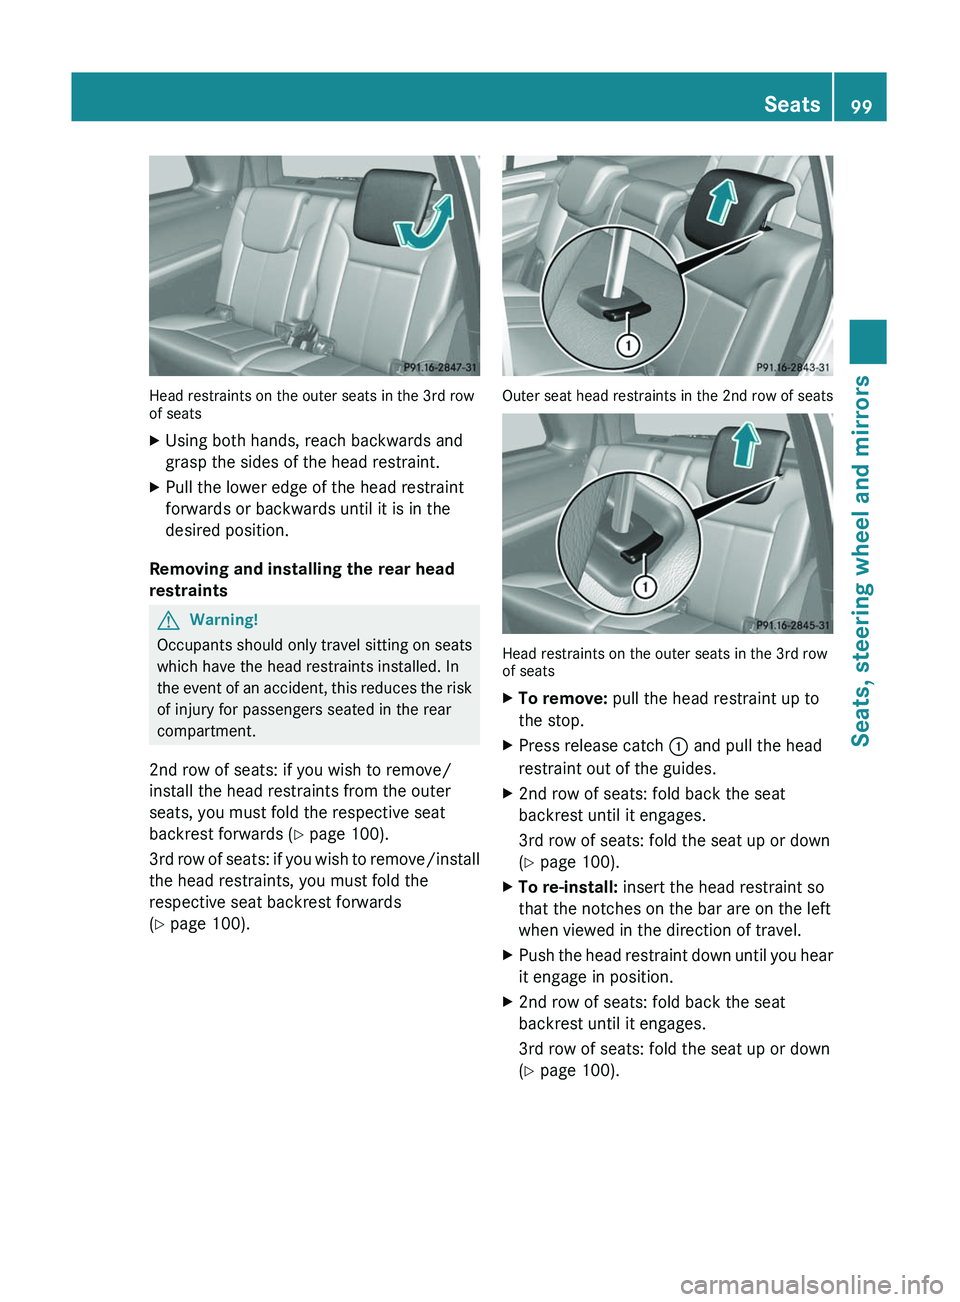 MERCEDES-BENZ GL 2011  Owners Manual Head restraints on the outer seats in the 3rd row
of seats
XUsing both hands, reach backwards and
grasp the sides of the head restraint.XPull the lower edge of the head restraint
forwards or backwards